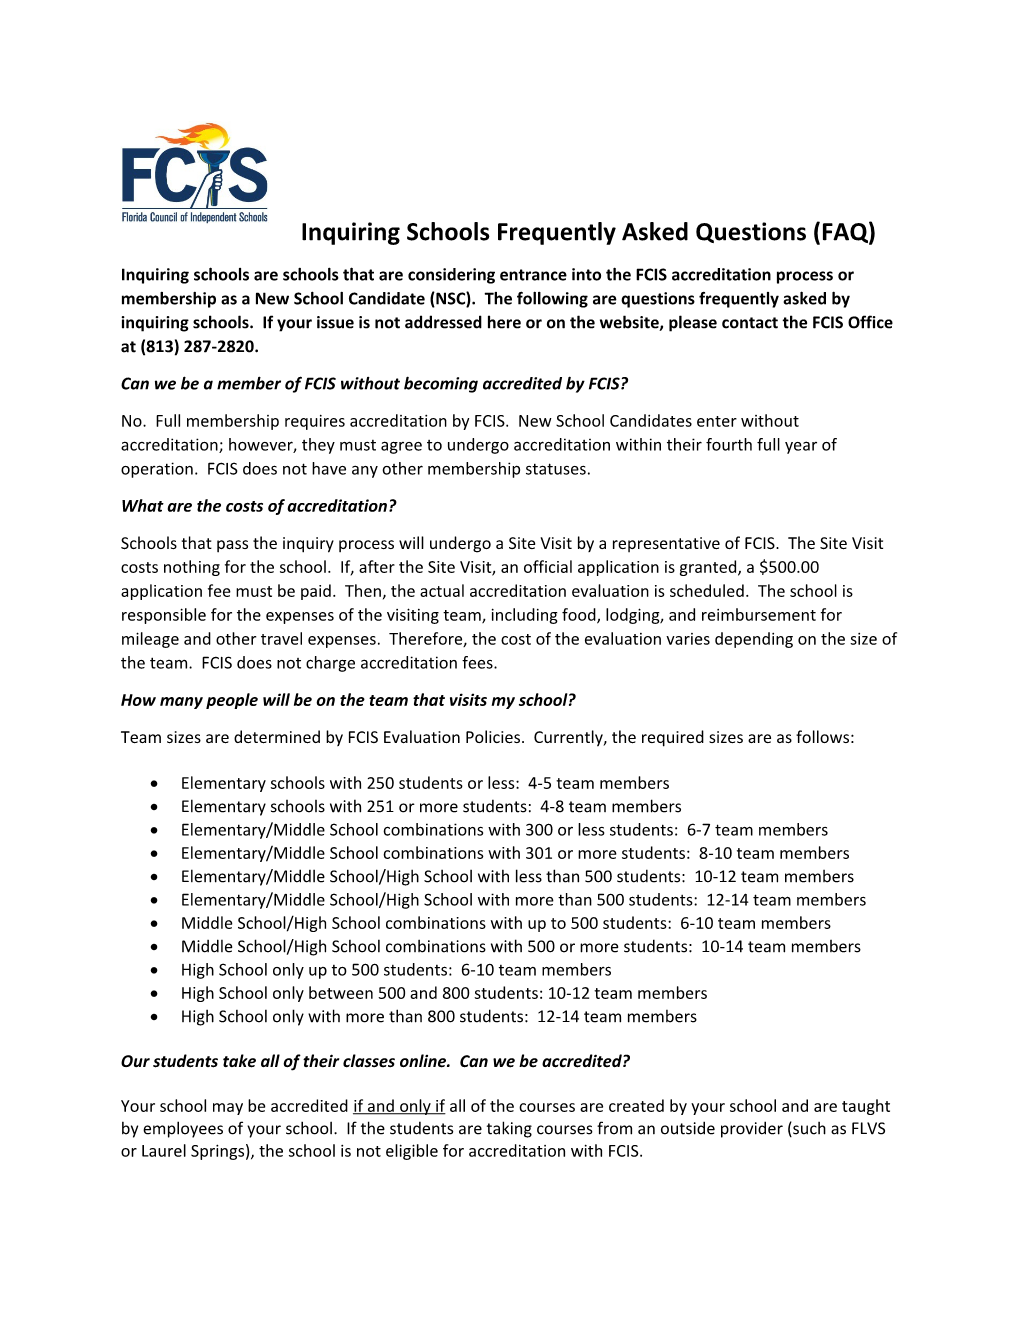 Can We Be a Member of FCIS Without Becoming Accredited by FCIS?